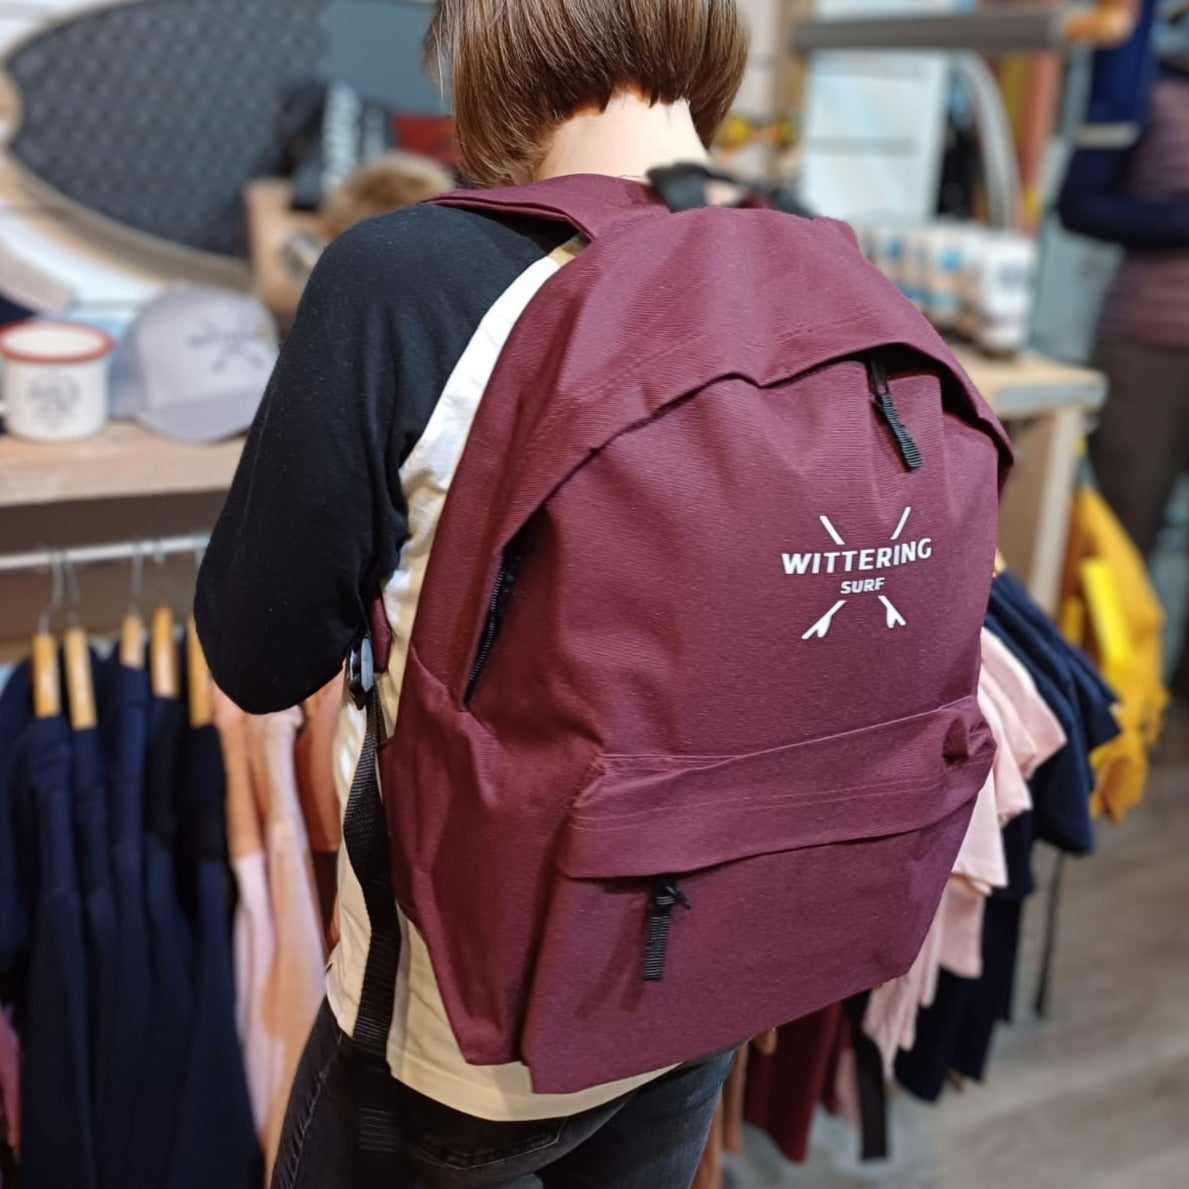 RECYCLED CAMPUS BACKPACK - BURGUNDY